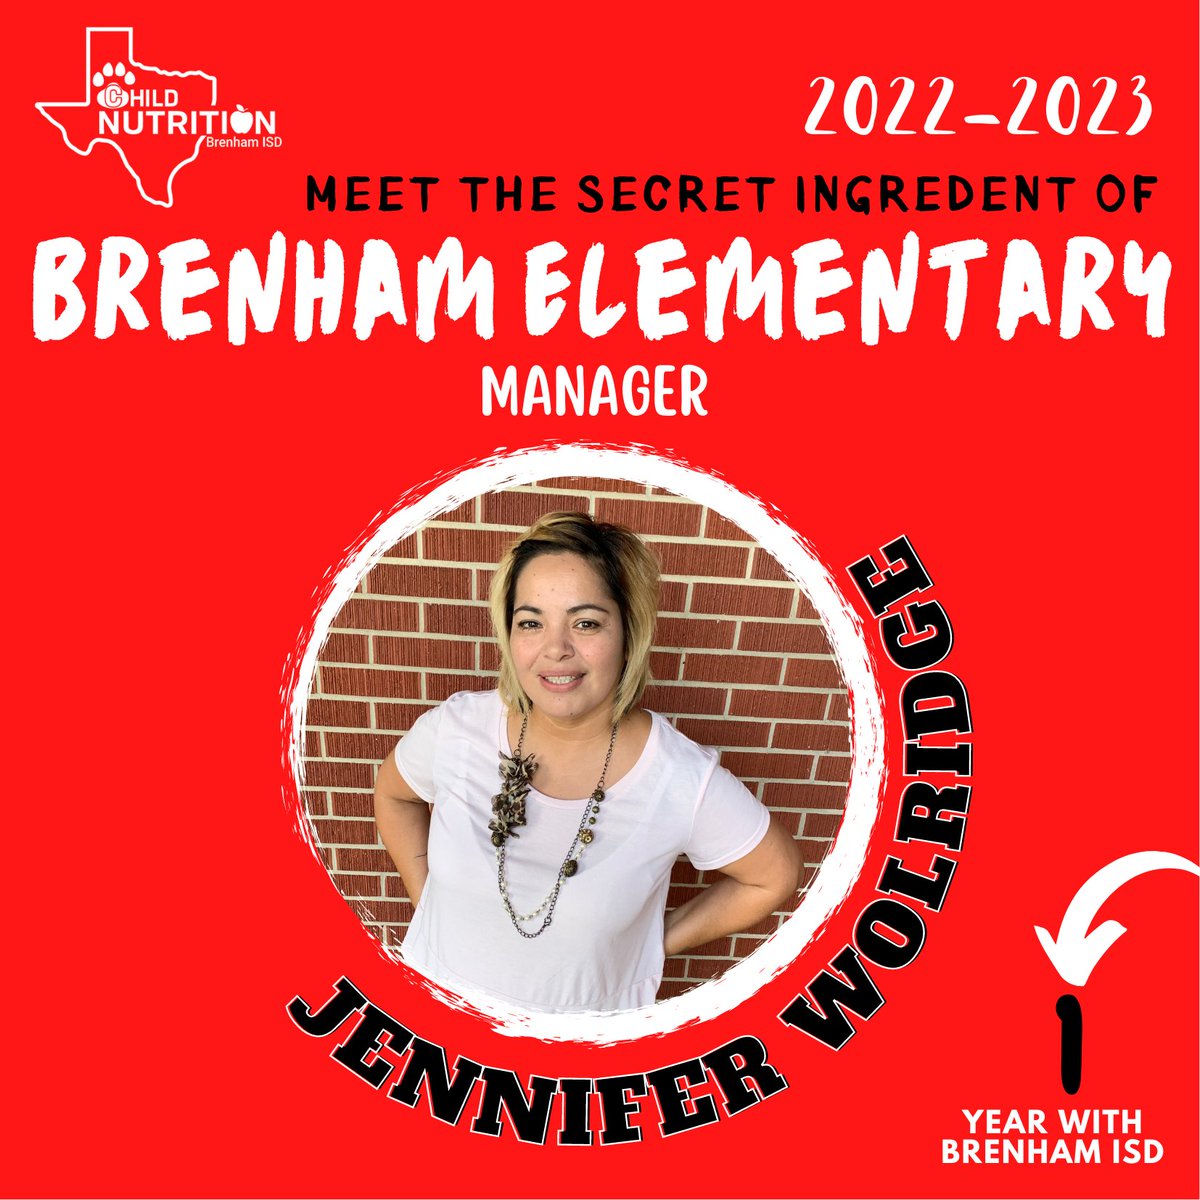 This new secret ingredient is coming to us with some fun ideas and inspiration. We are happy to introduce Jennifer Wolridge as the new manager at @BrenhamElem! 💚 @BrenhamISD